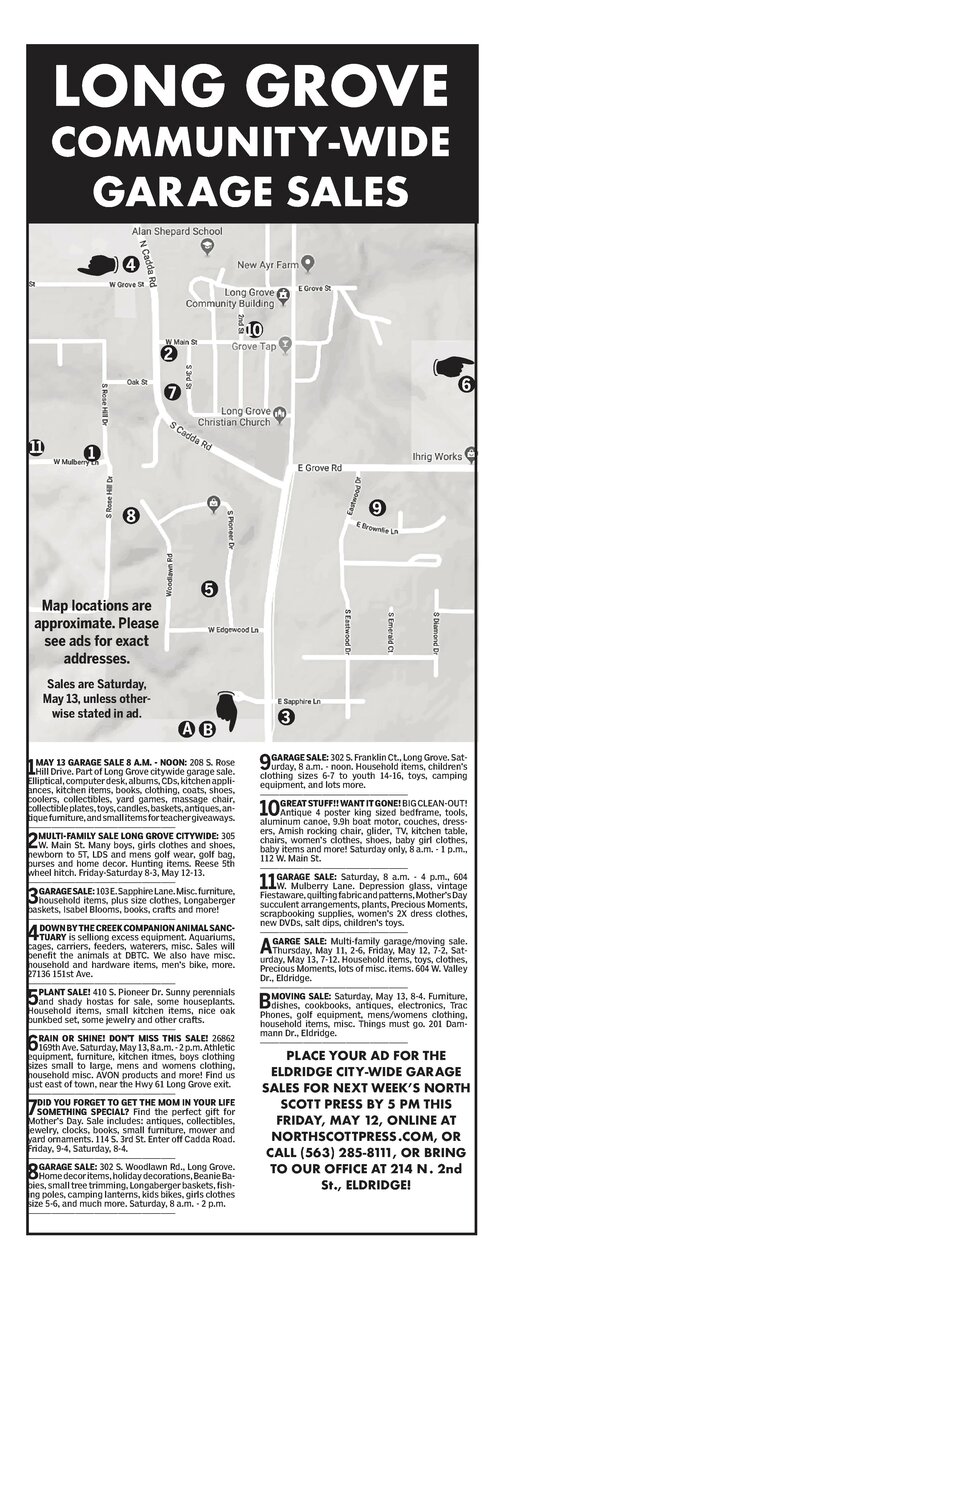 Get your copy of the Long Grove garage sale map here! North Scott Press